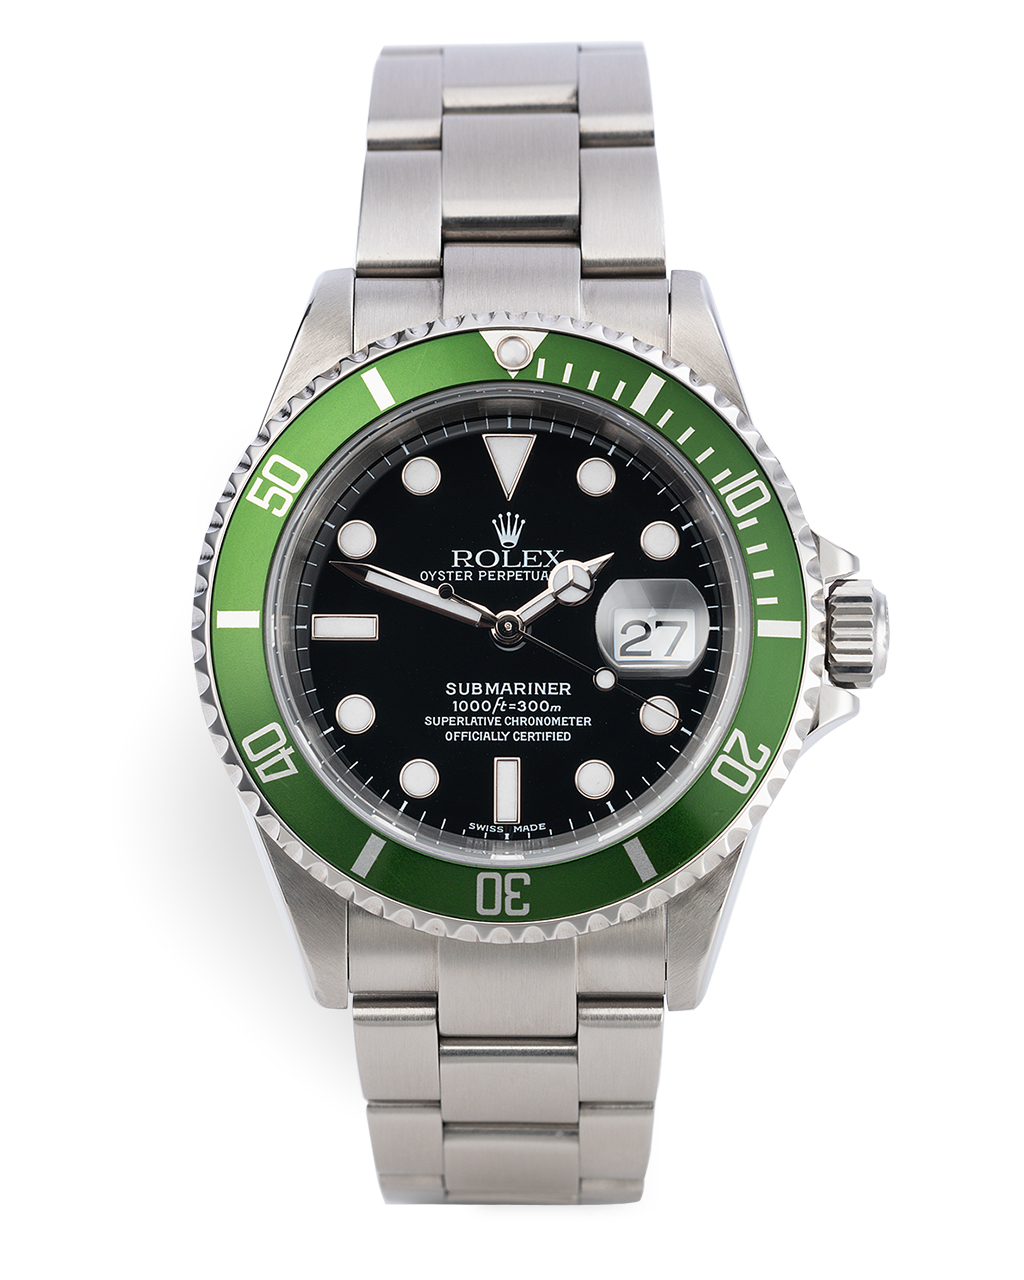 radius Let at ske Rig mand Rolex Submariner Date Watches | ref 16610LV | Rare 'Y Serial' Fat Four |  The Watch Club